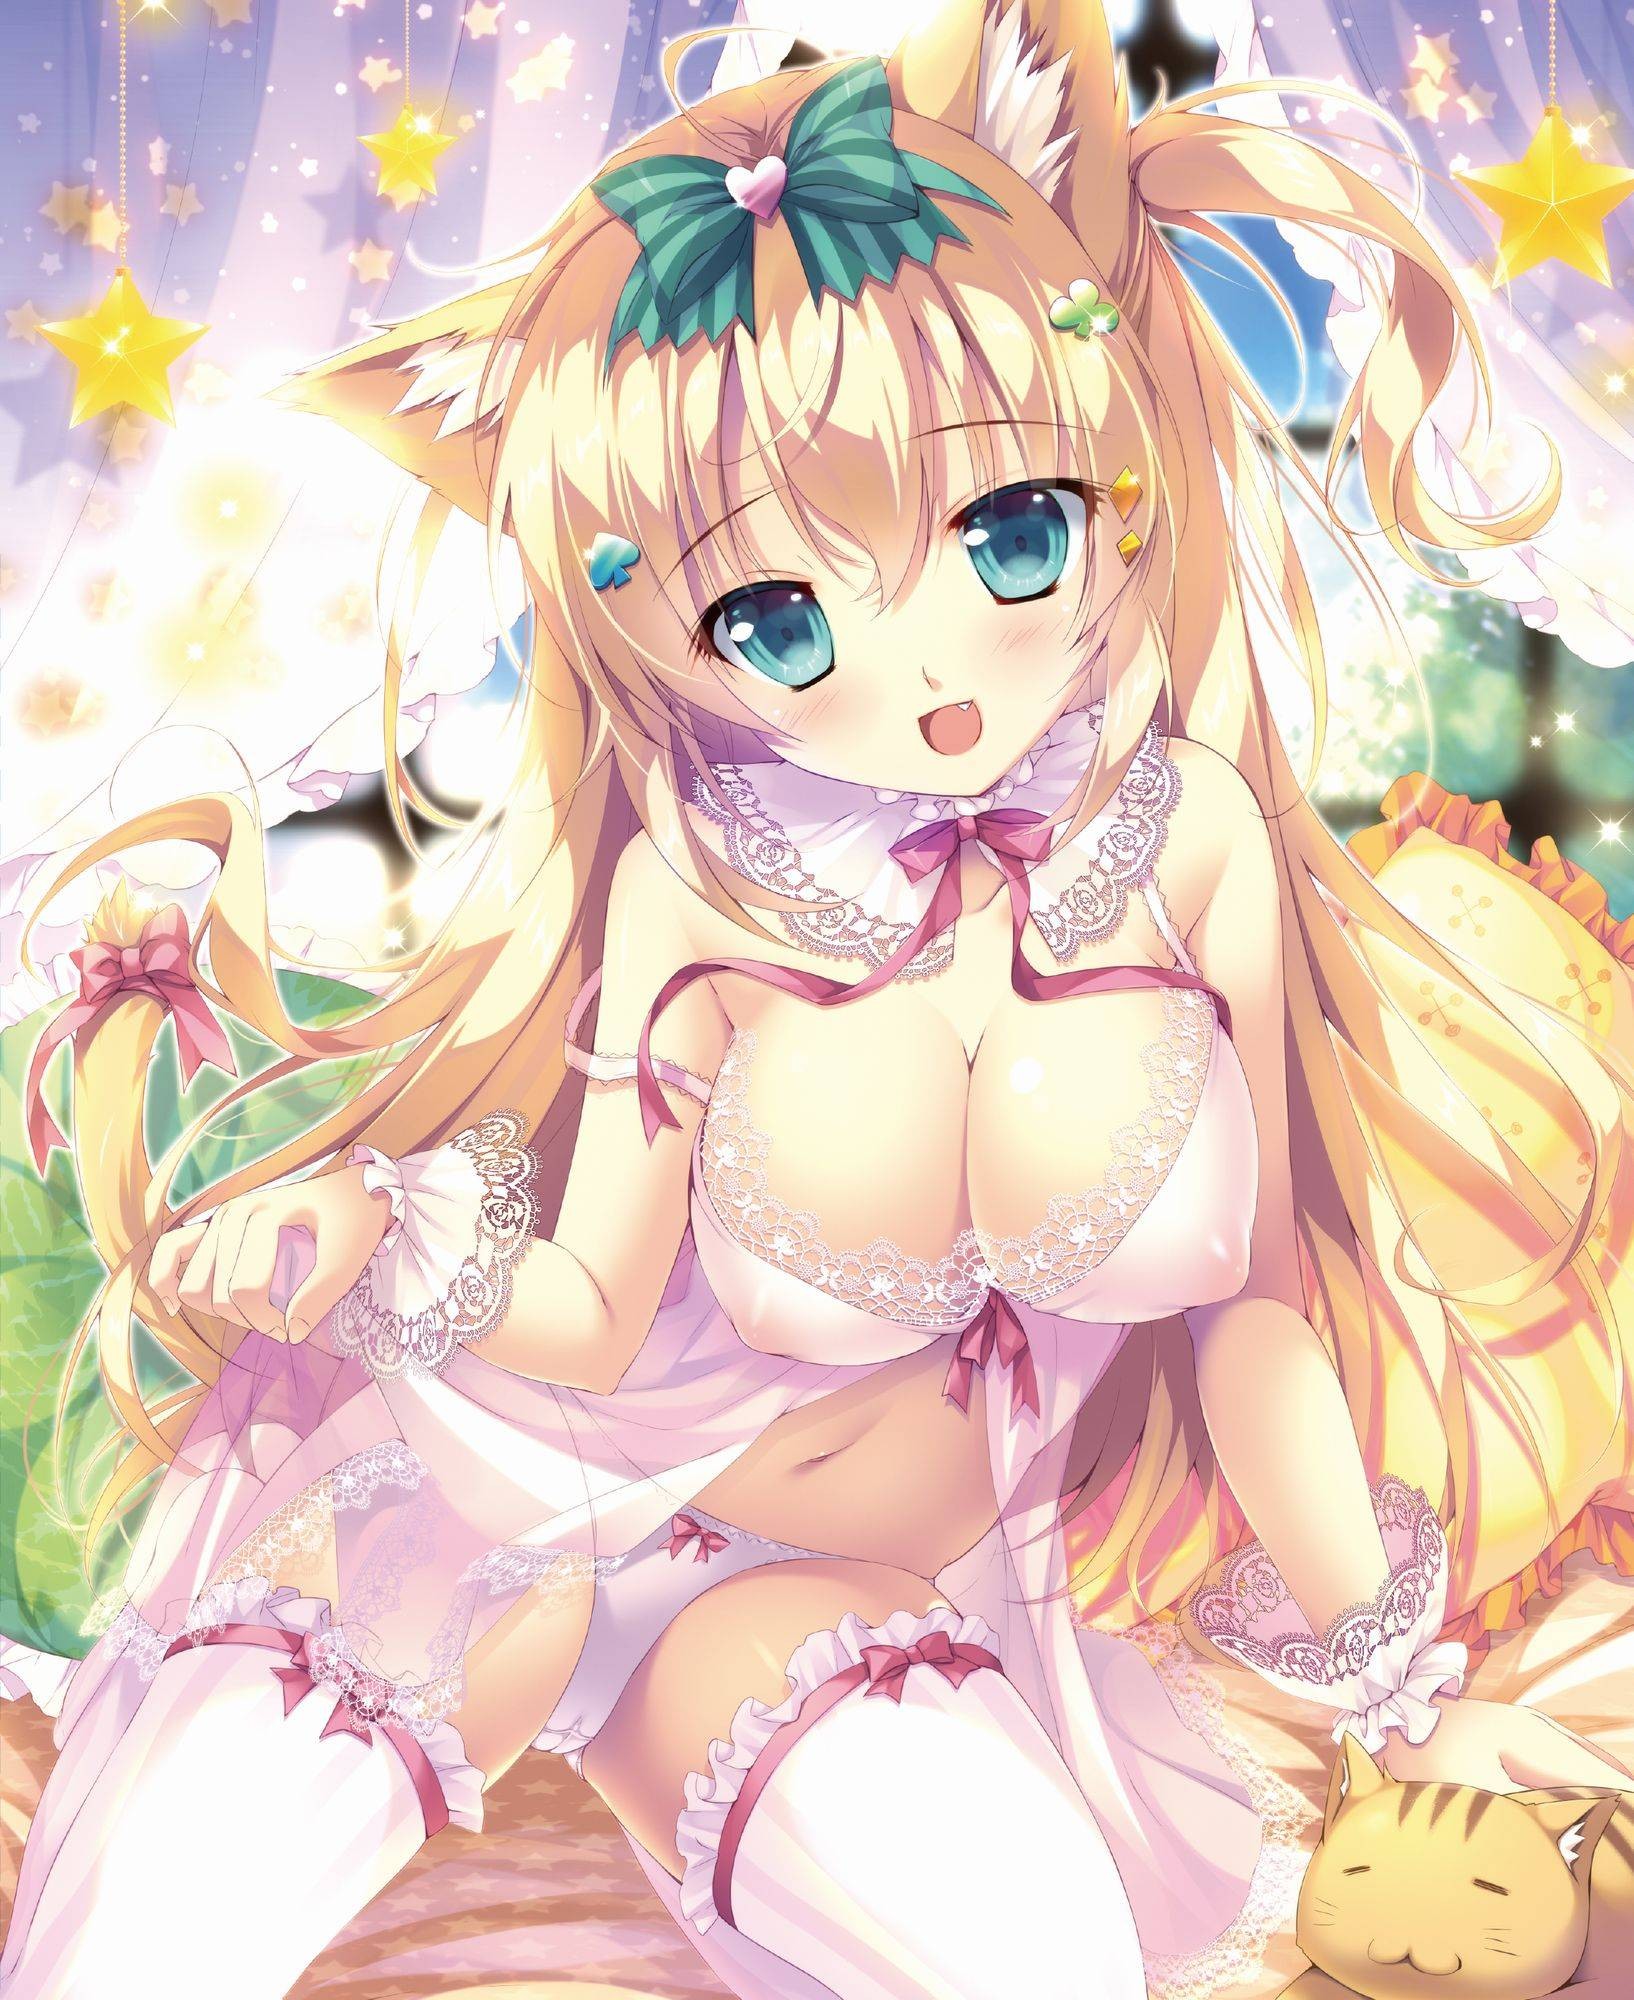 Anime 1634x2000 anime anime girls blonde lingerie thigh-highs kneeling animal ears tail cat girl aqua eyes see-through lingerie nipple bulge big boobs cleavage cameltoe cats Mikeou